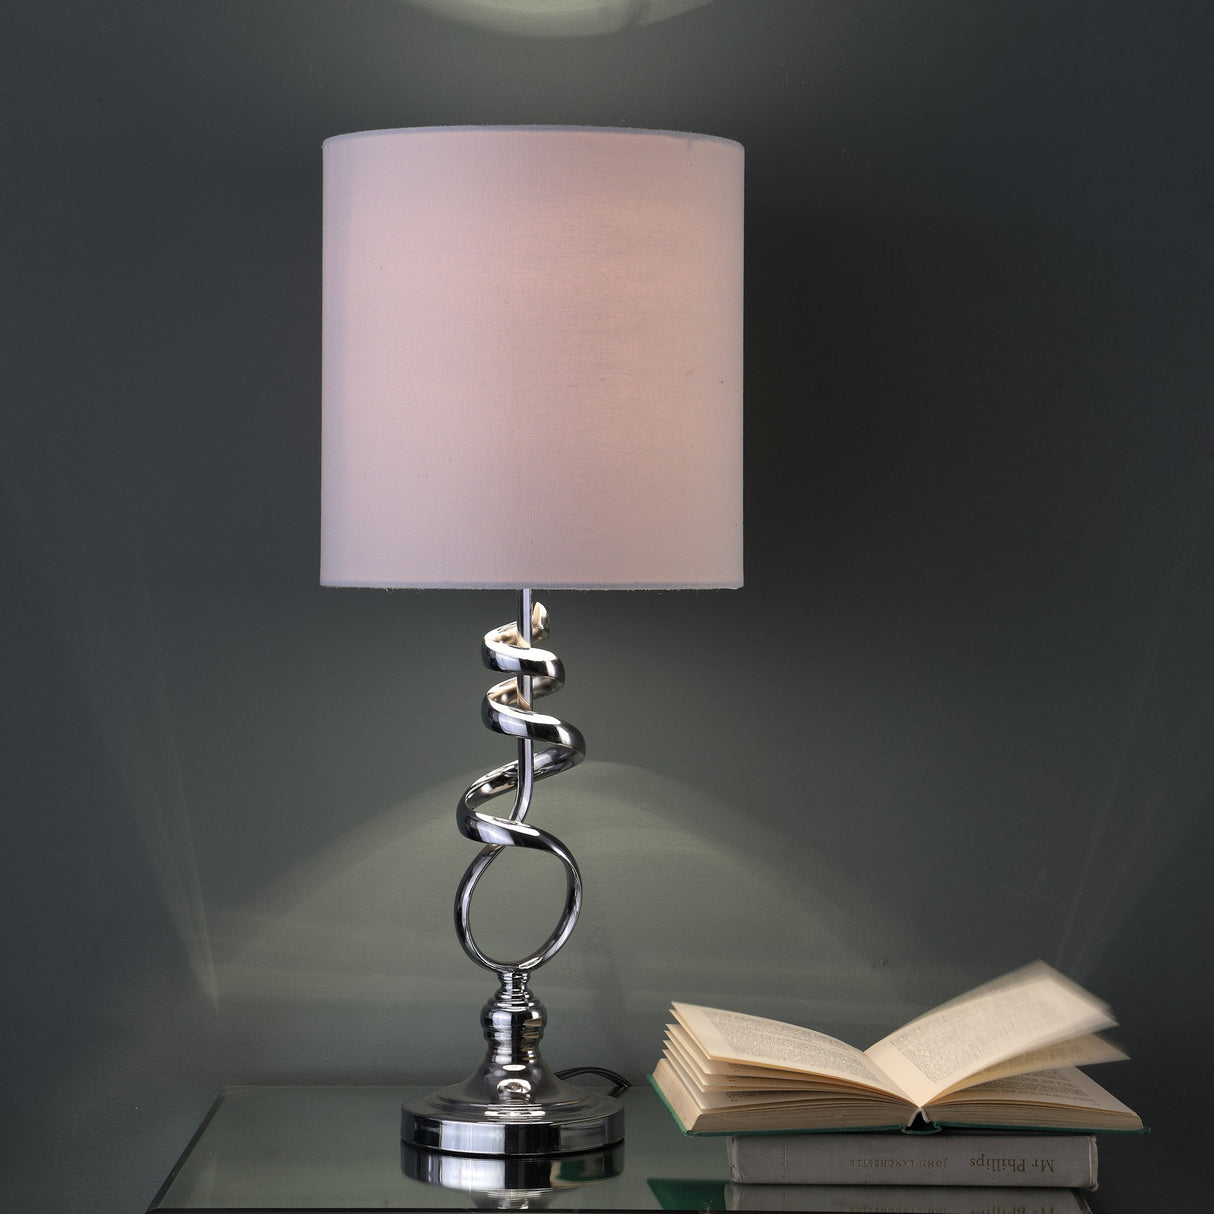 22" Nickel Bedside Table Lamp With Off White Drum Shade